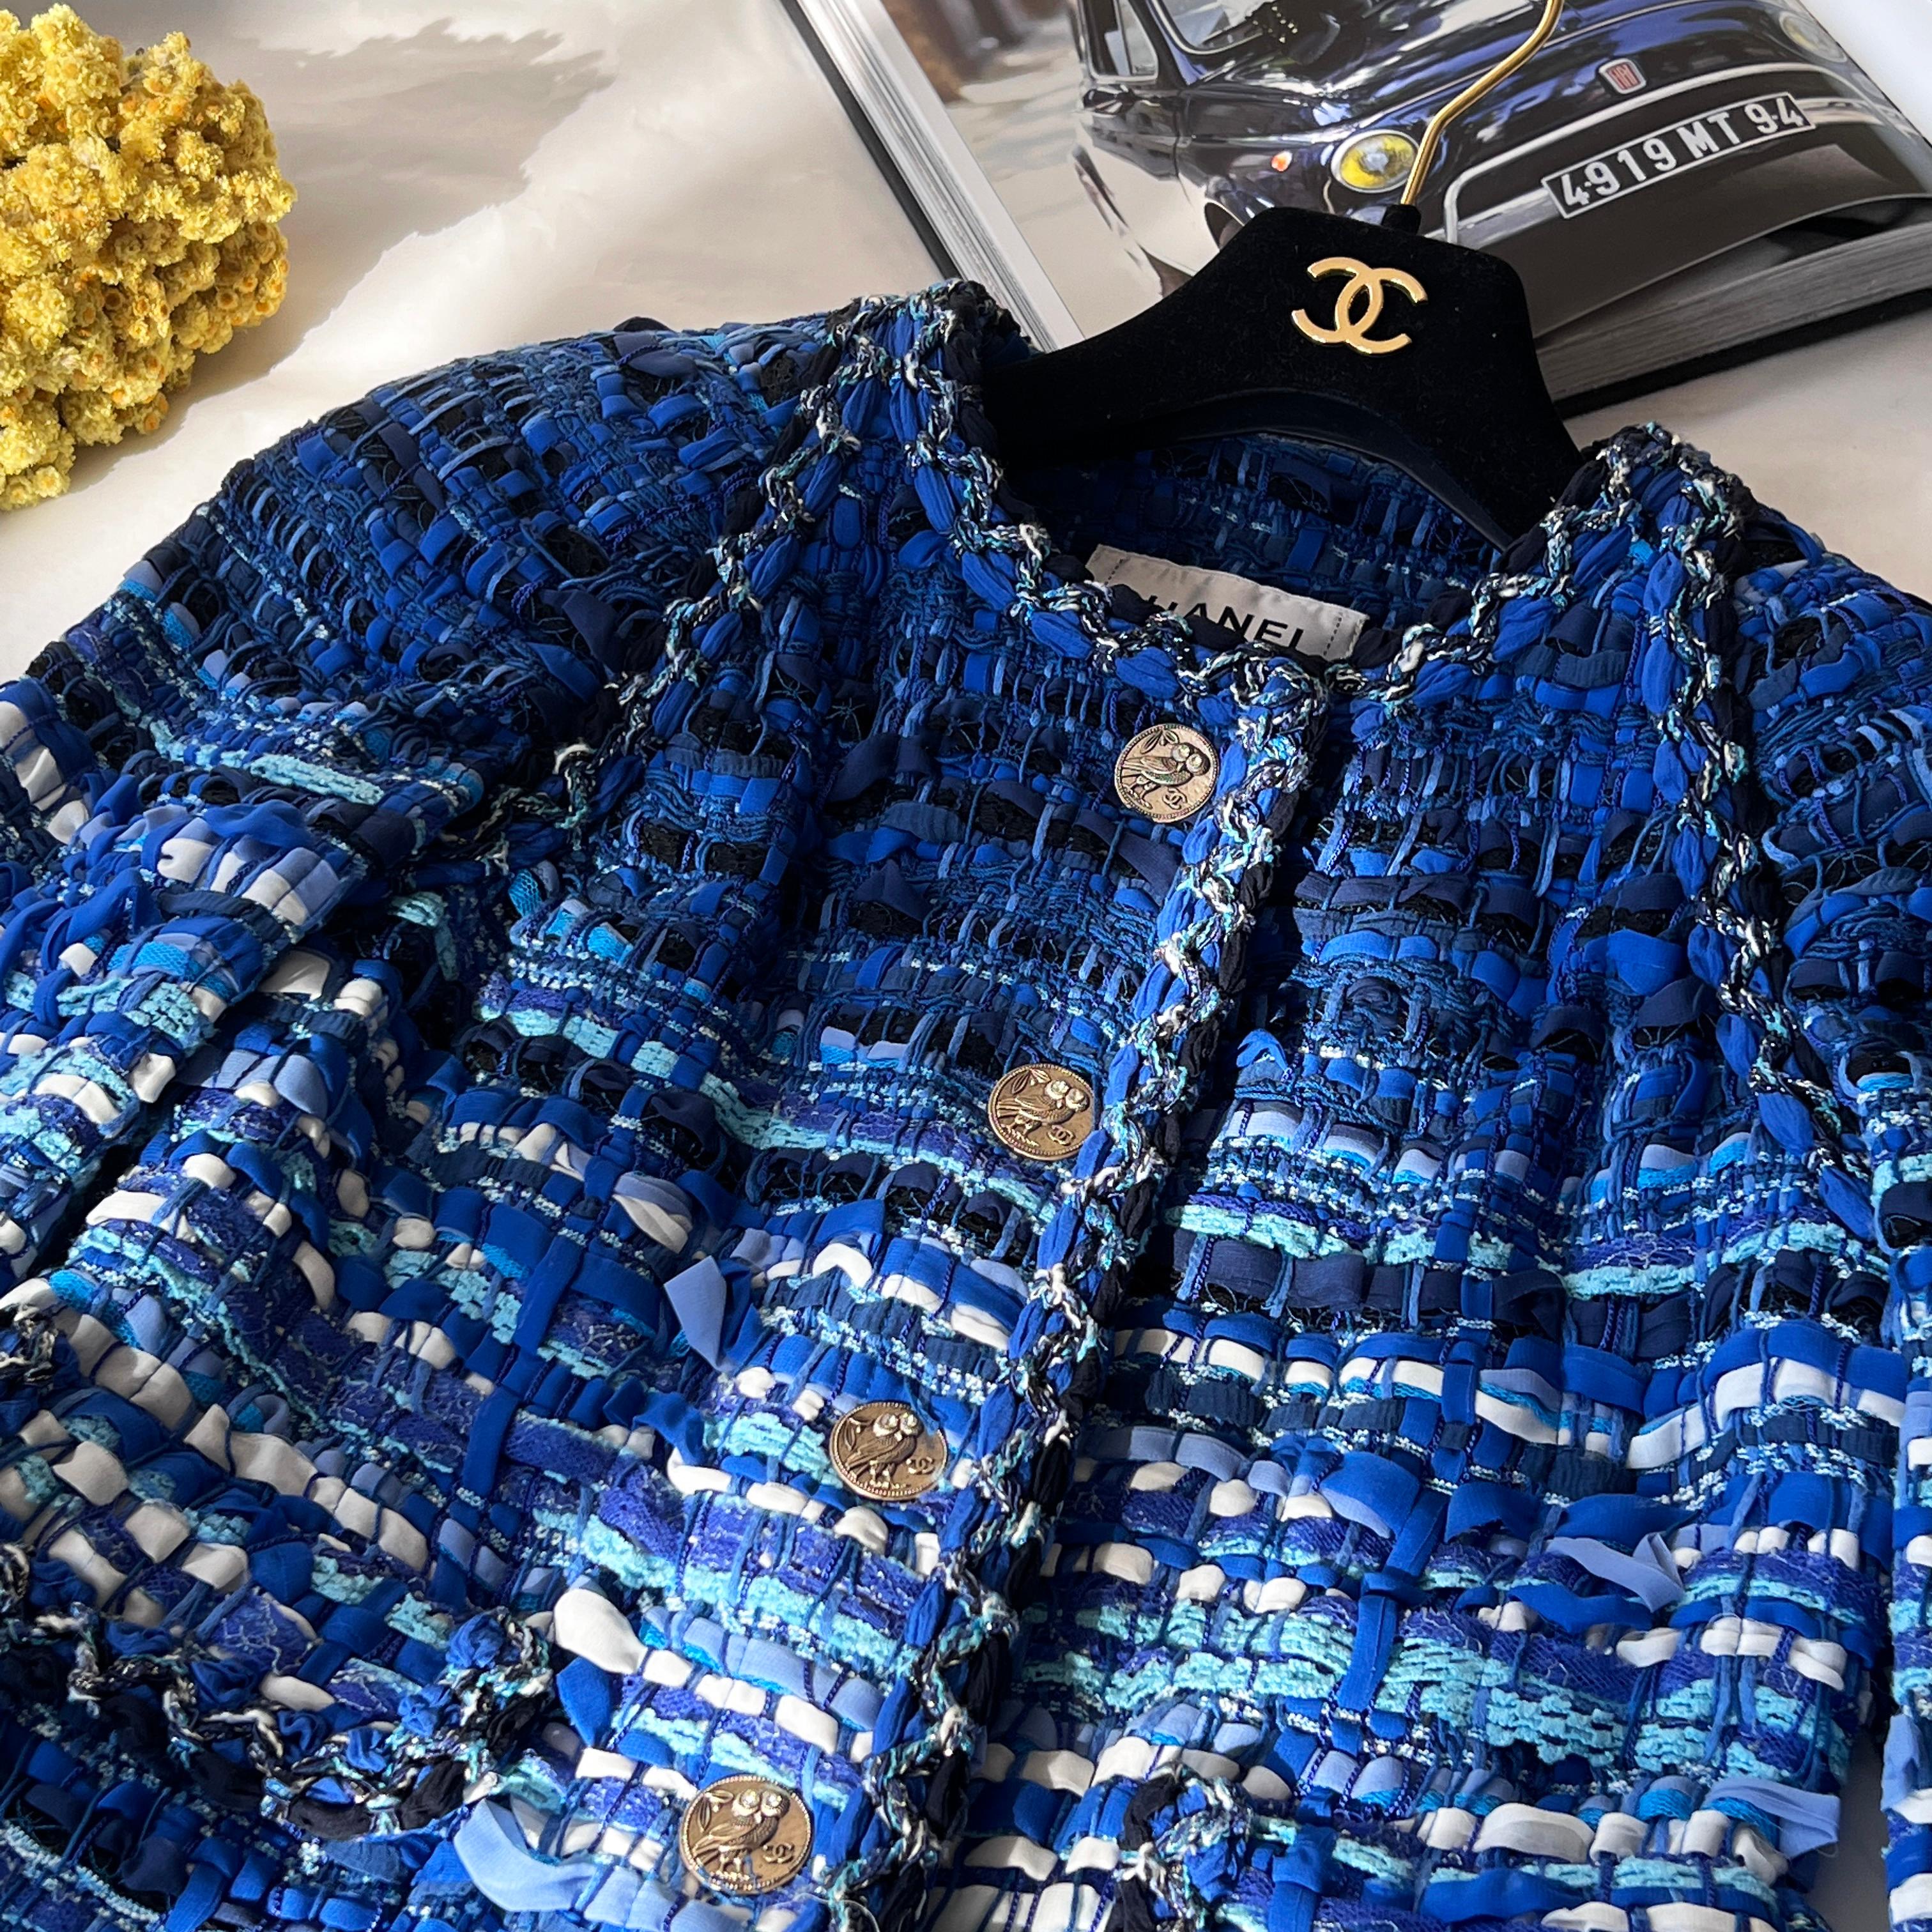 Fabulous Chanel royal blue ribbon tweed jacket from 2018 Cruise Paris / Greece Collection, Modernity of the Antiquity, 18C
Retail price over 12,000€, today's boutique price for ribbon tweed jacket starts at 18,000€
Size mark 38 FR, condition is